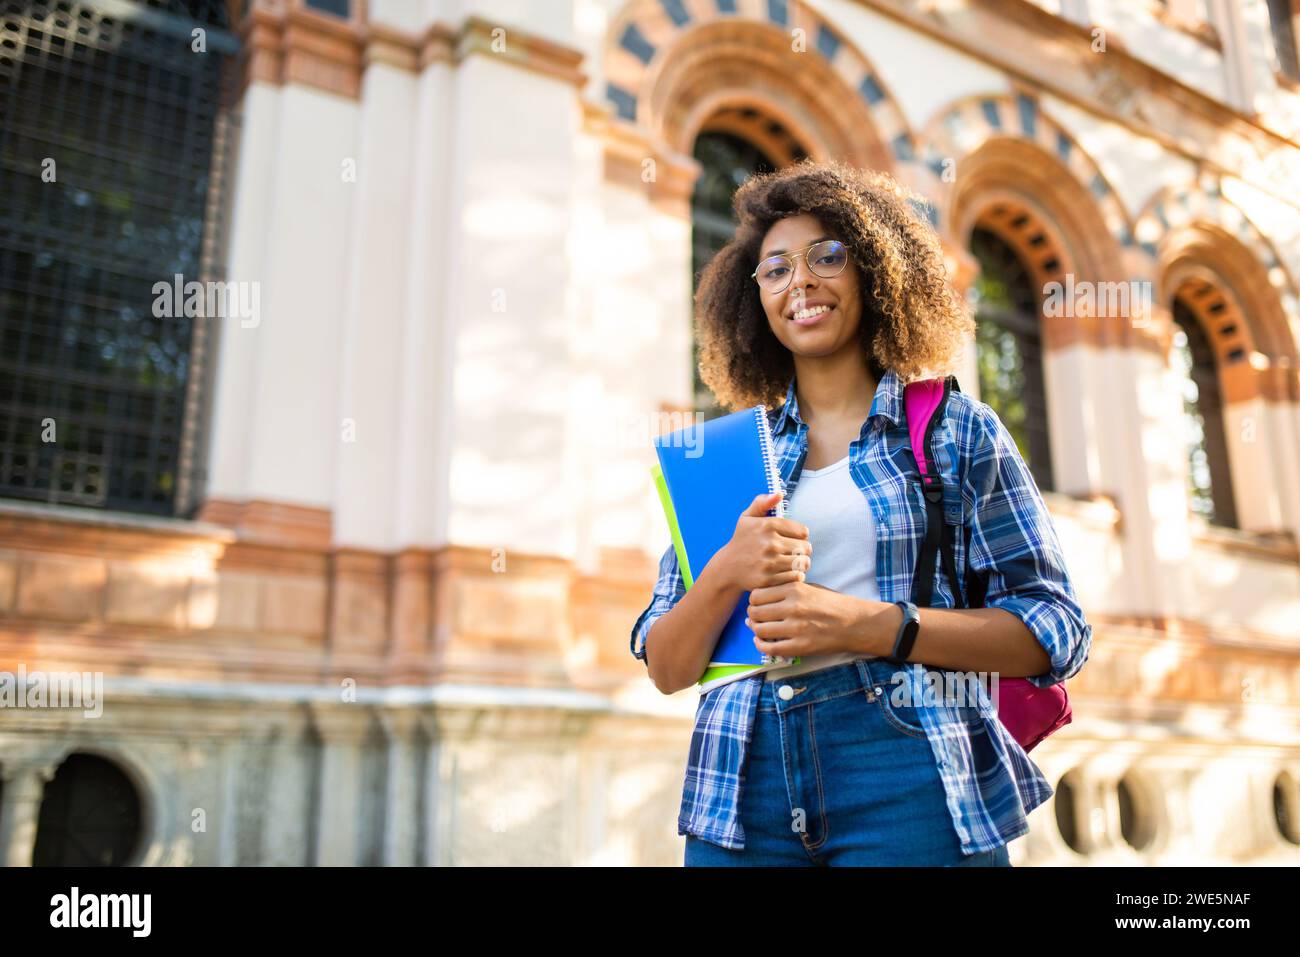 Portrait of a female college student Stock Photo